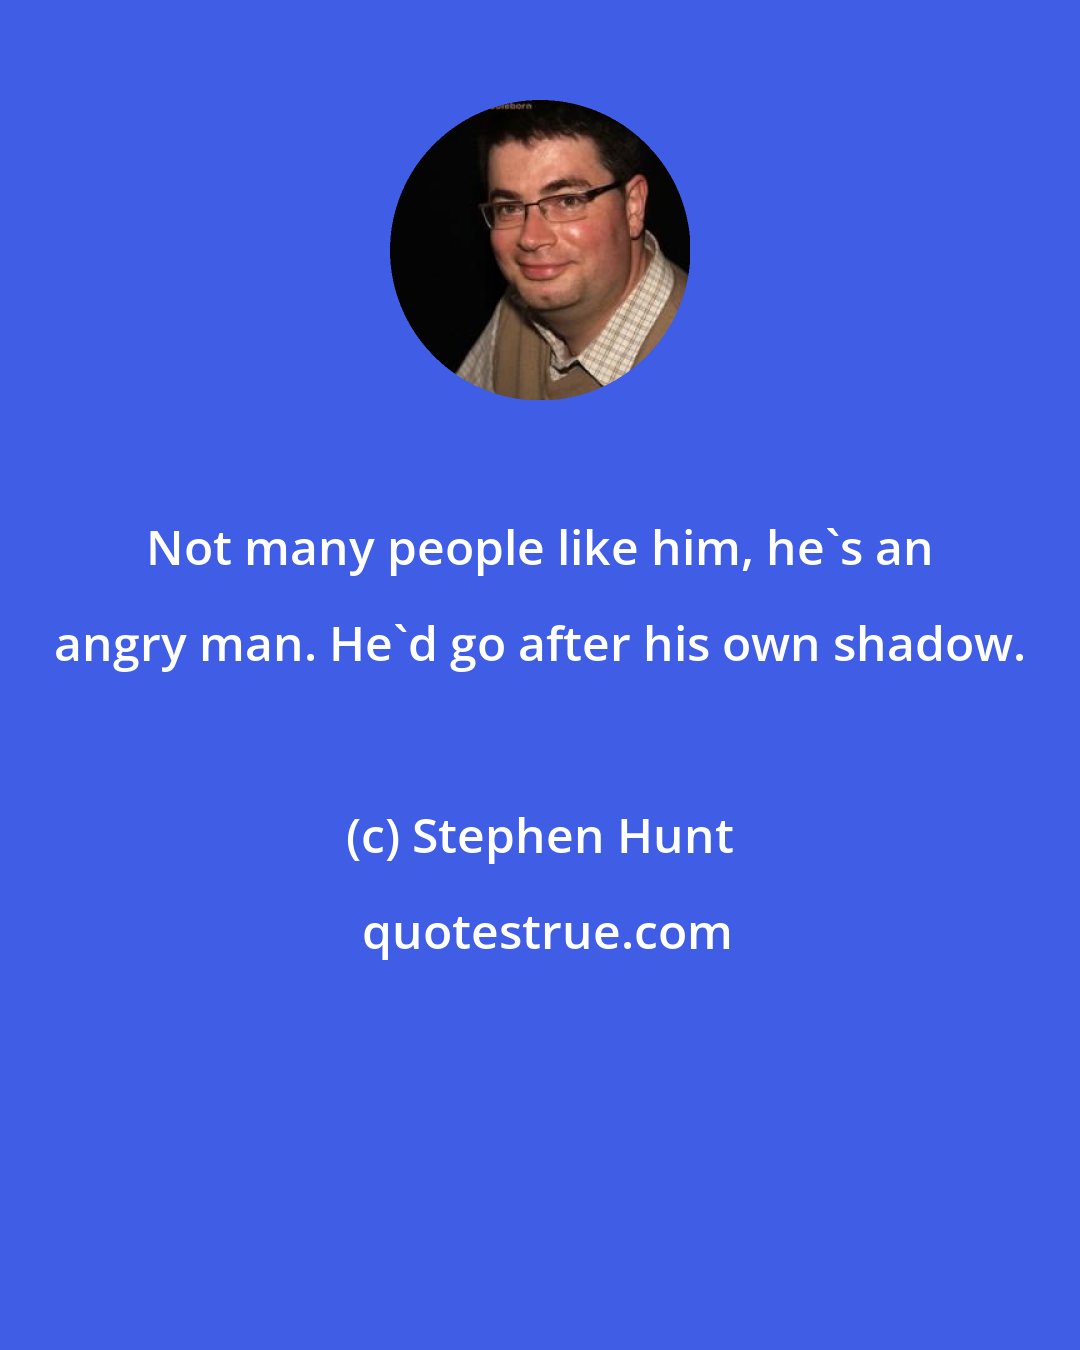 Stephen Hunt: Not many people like him, he's an angry man. He'd go after his own shadow.